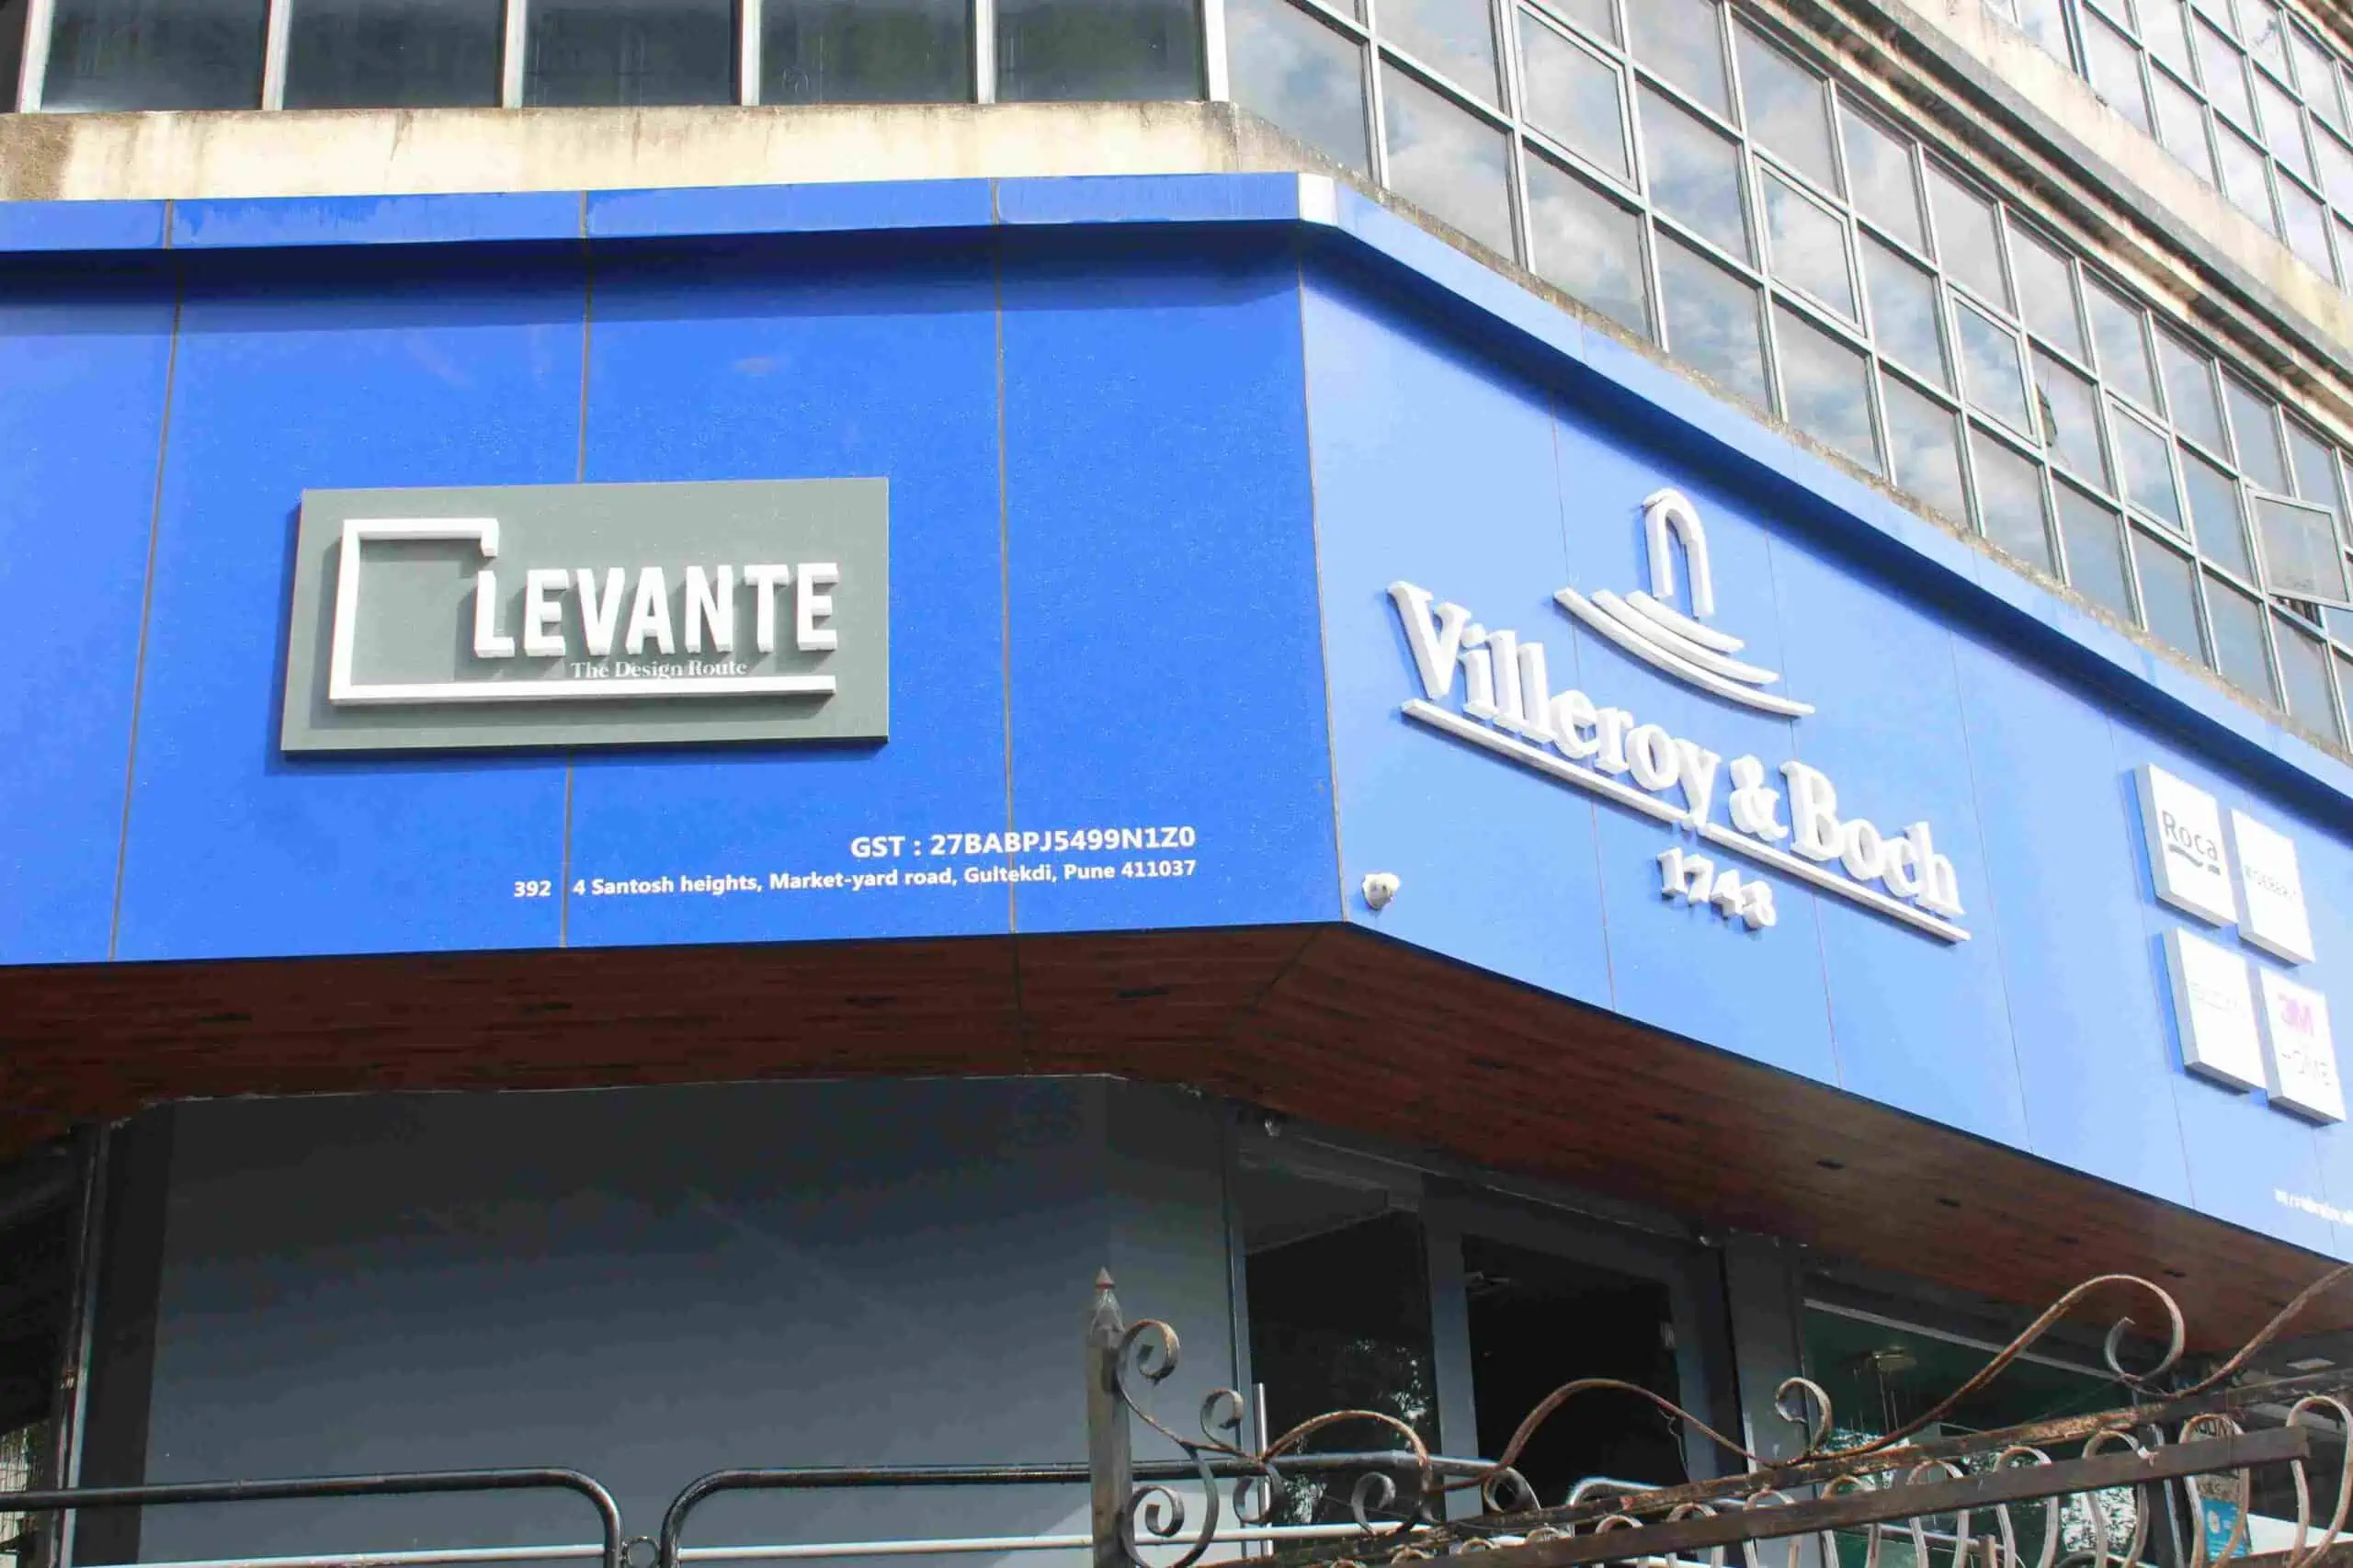 Levante store dealers of bathroom fittings and sanitaryware of Velleroy and boch in pune